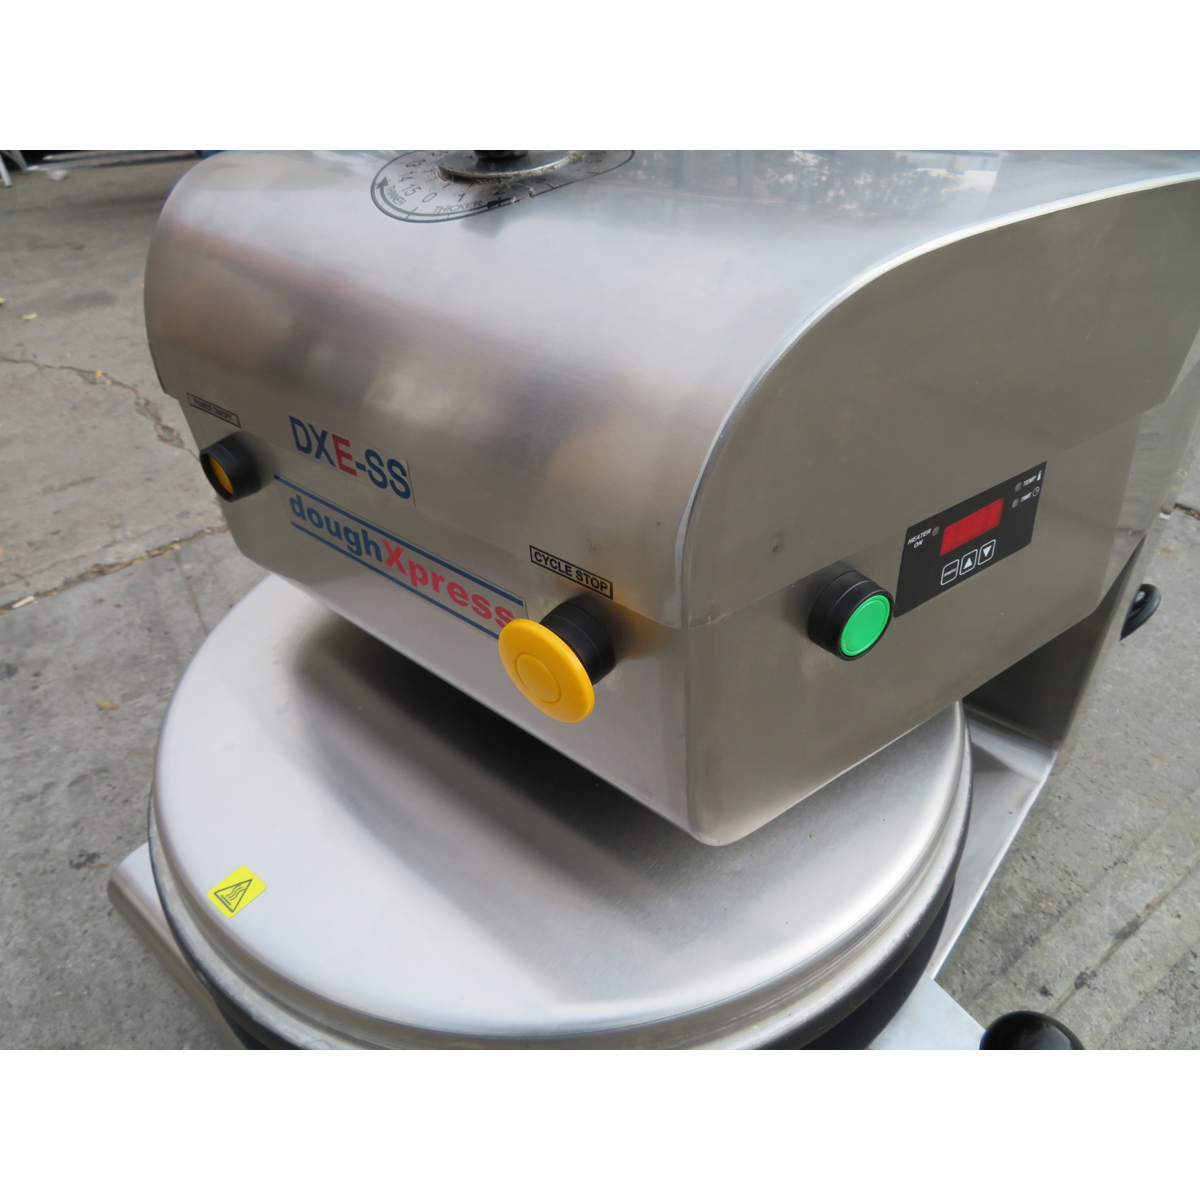 DoughXpress DXE-SS Pizza Press, Used Excellent Condition image 2